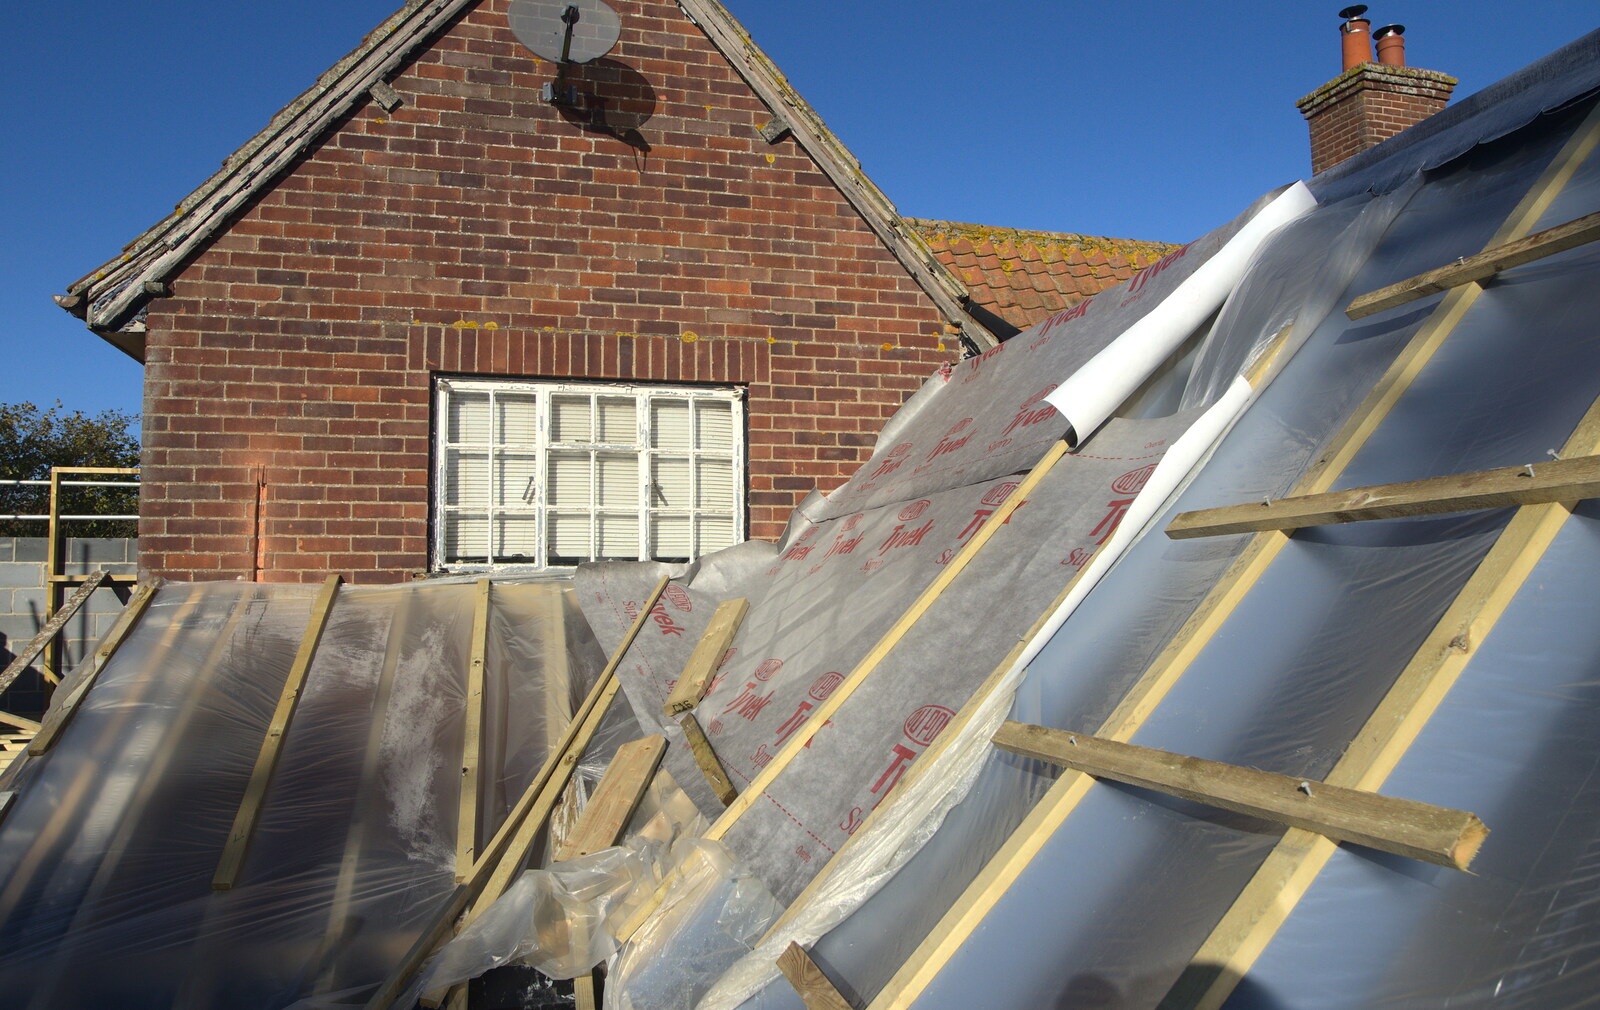 A November Miscellany and Building Progress, Thornham and Brome, Suffolk - 17th November 2013: The view from the scaffolding